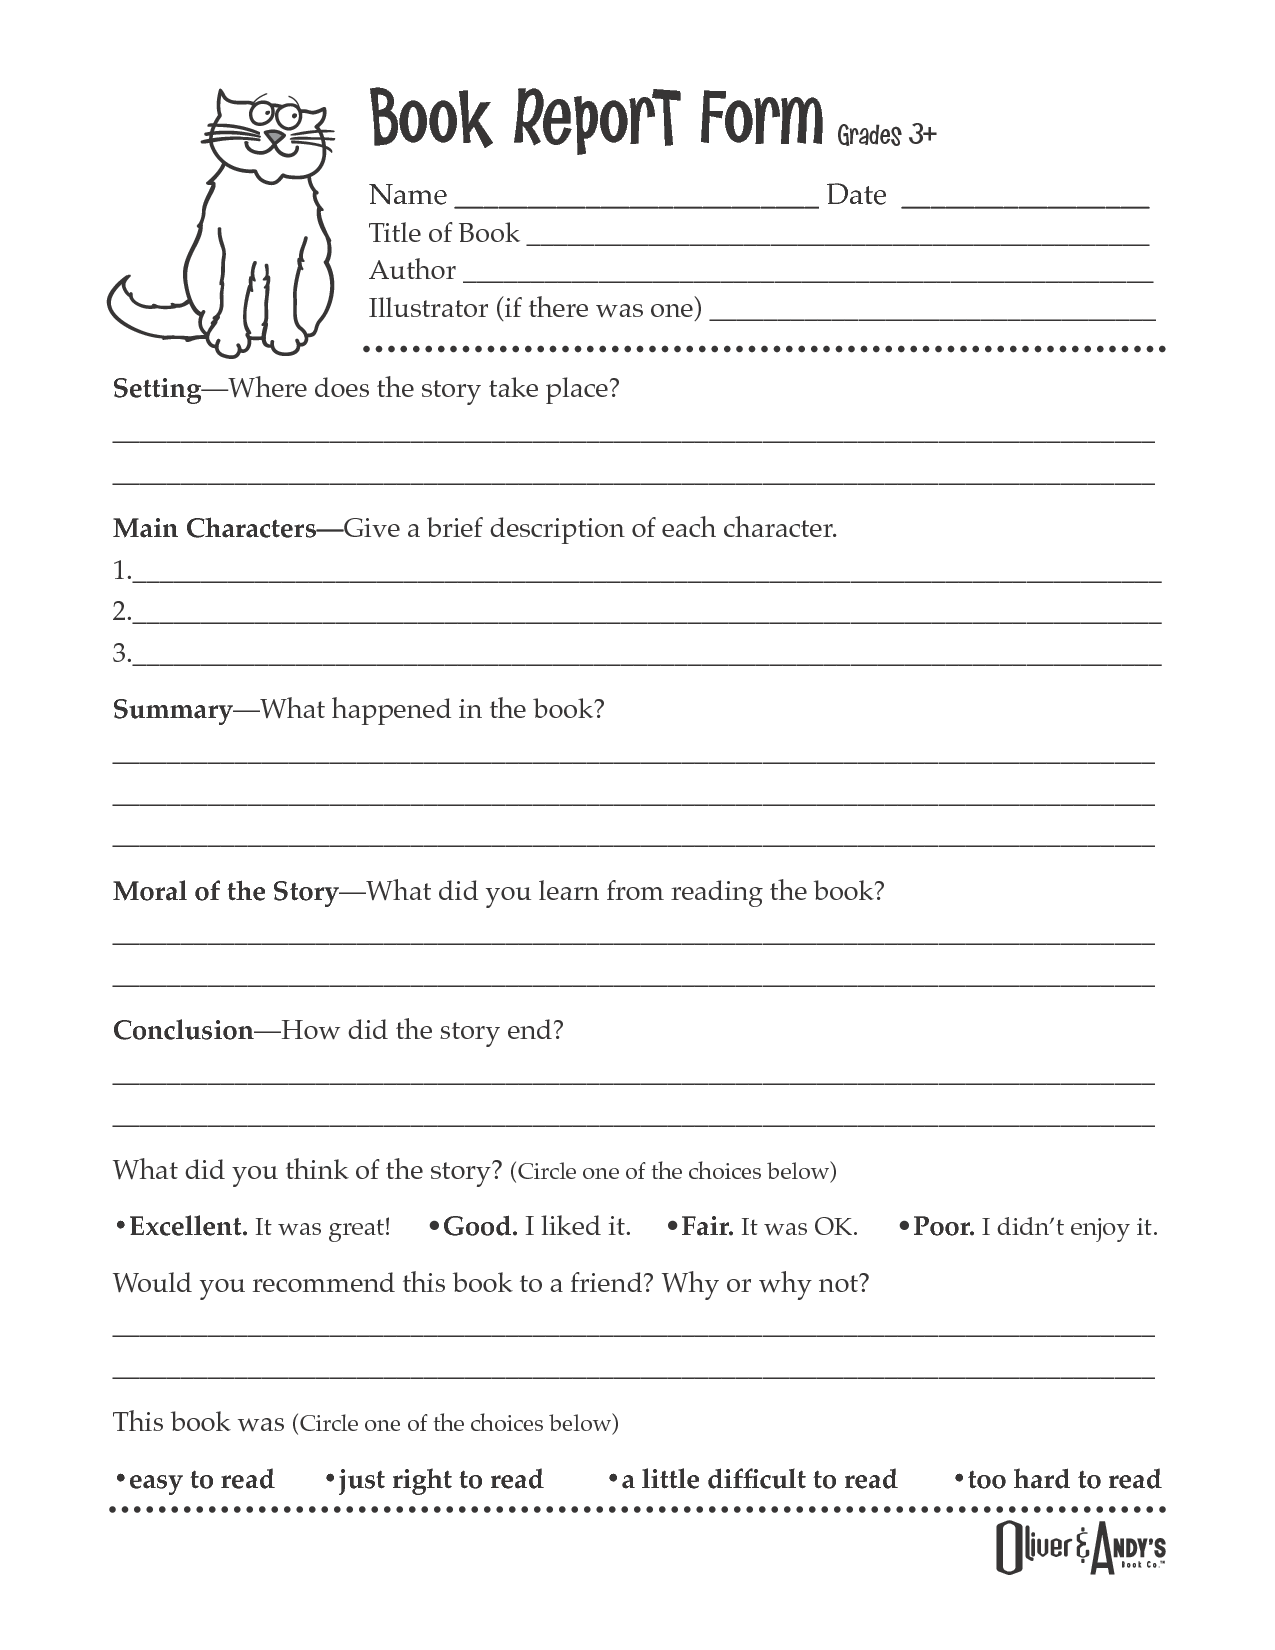 9-best-images-of-biography-writing-worksheets-biography-book-report